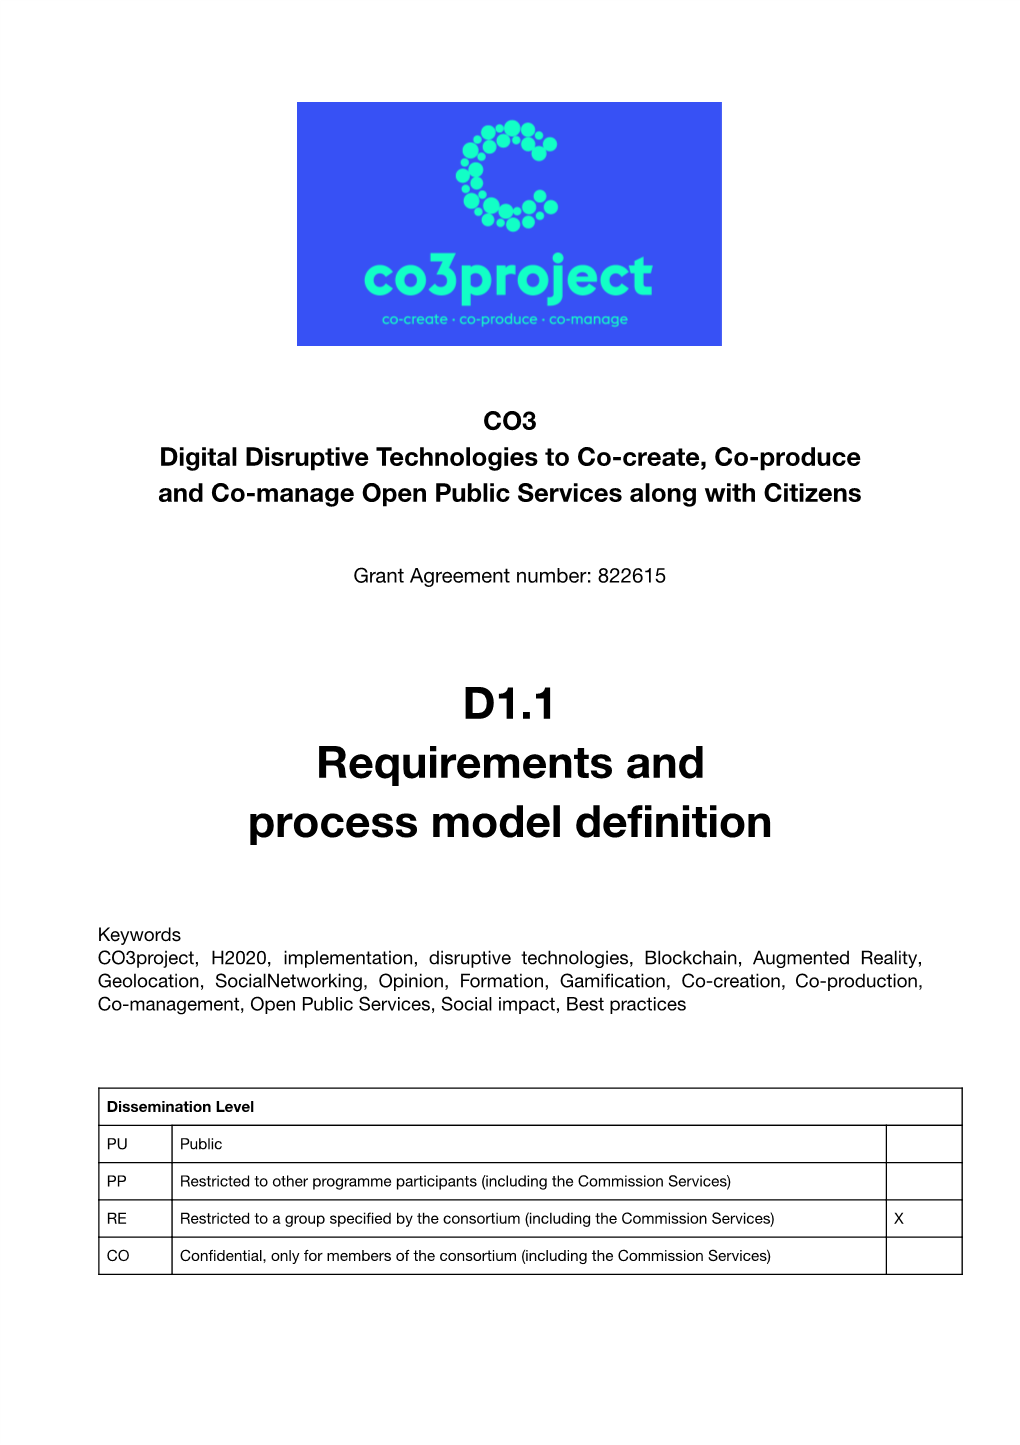 D1.1 Requirements and Process Model Definition